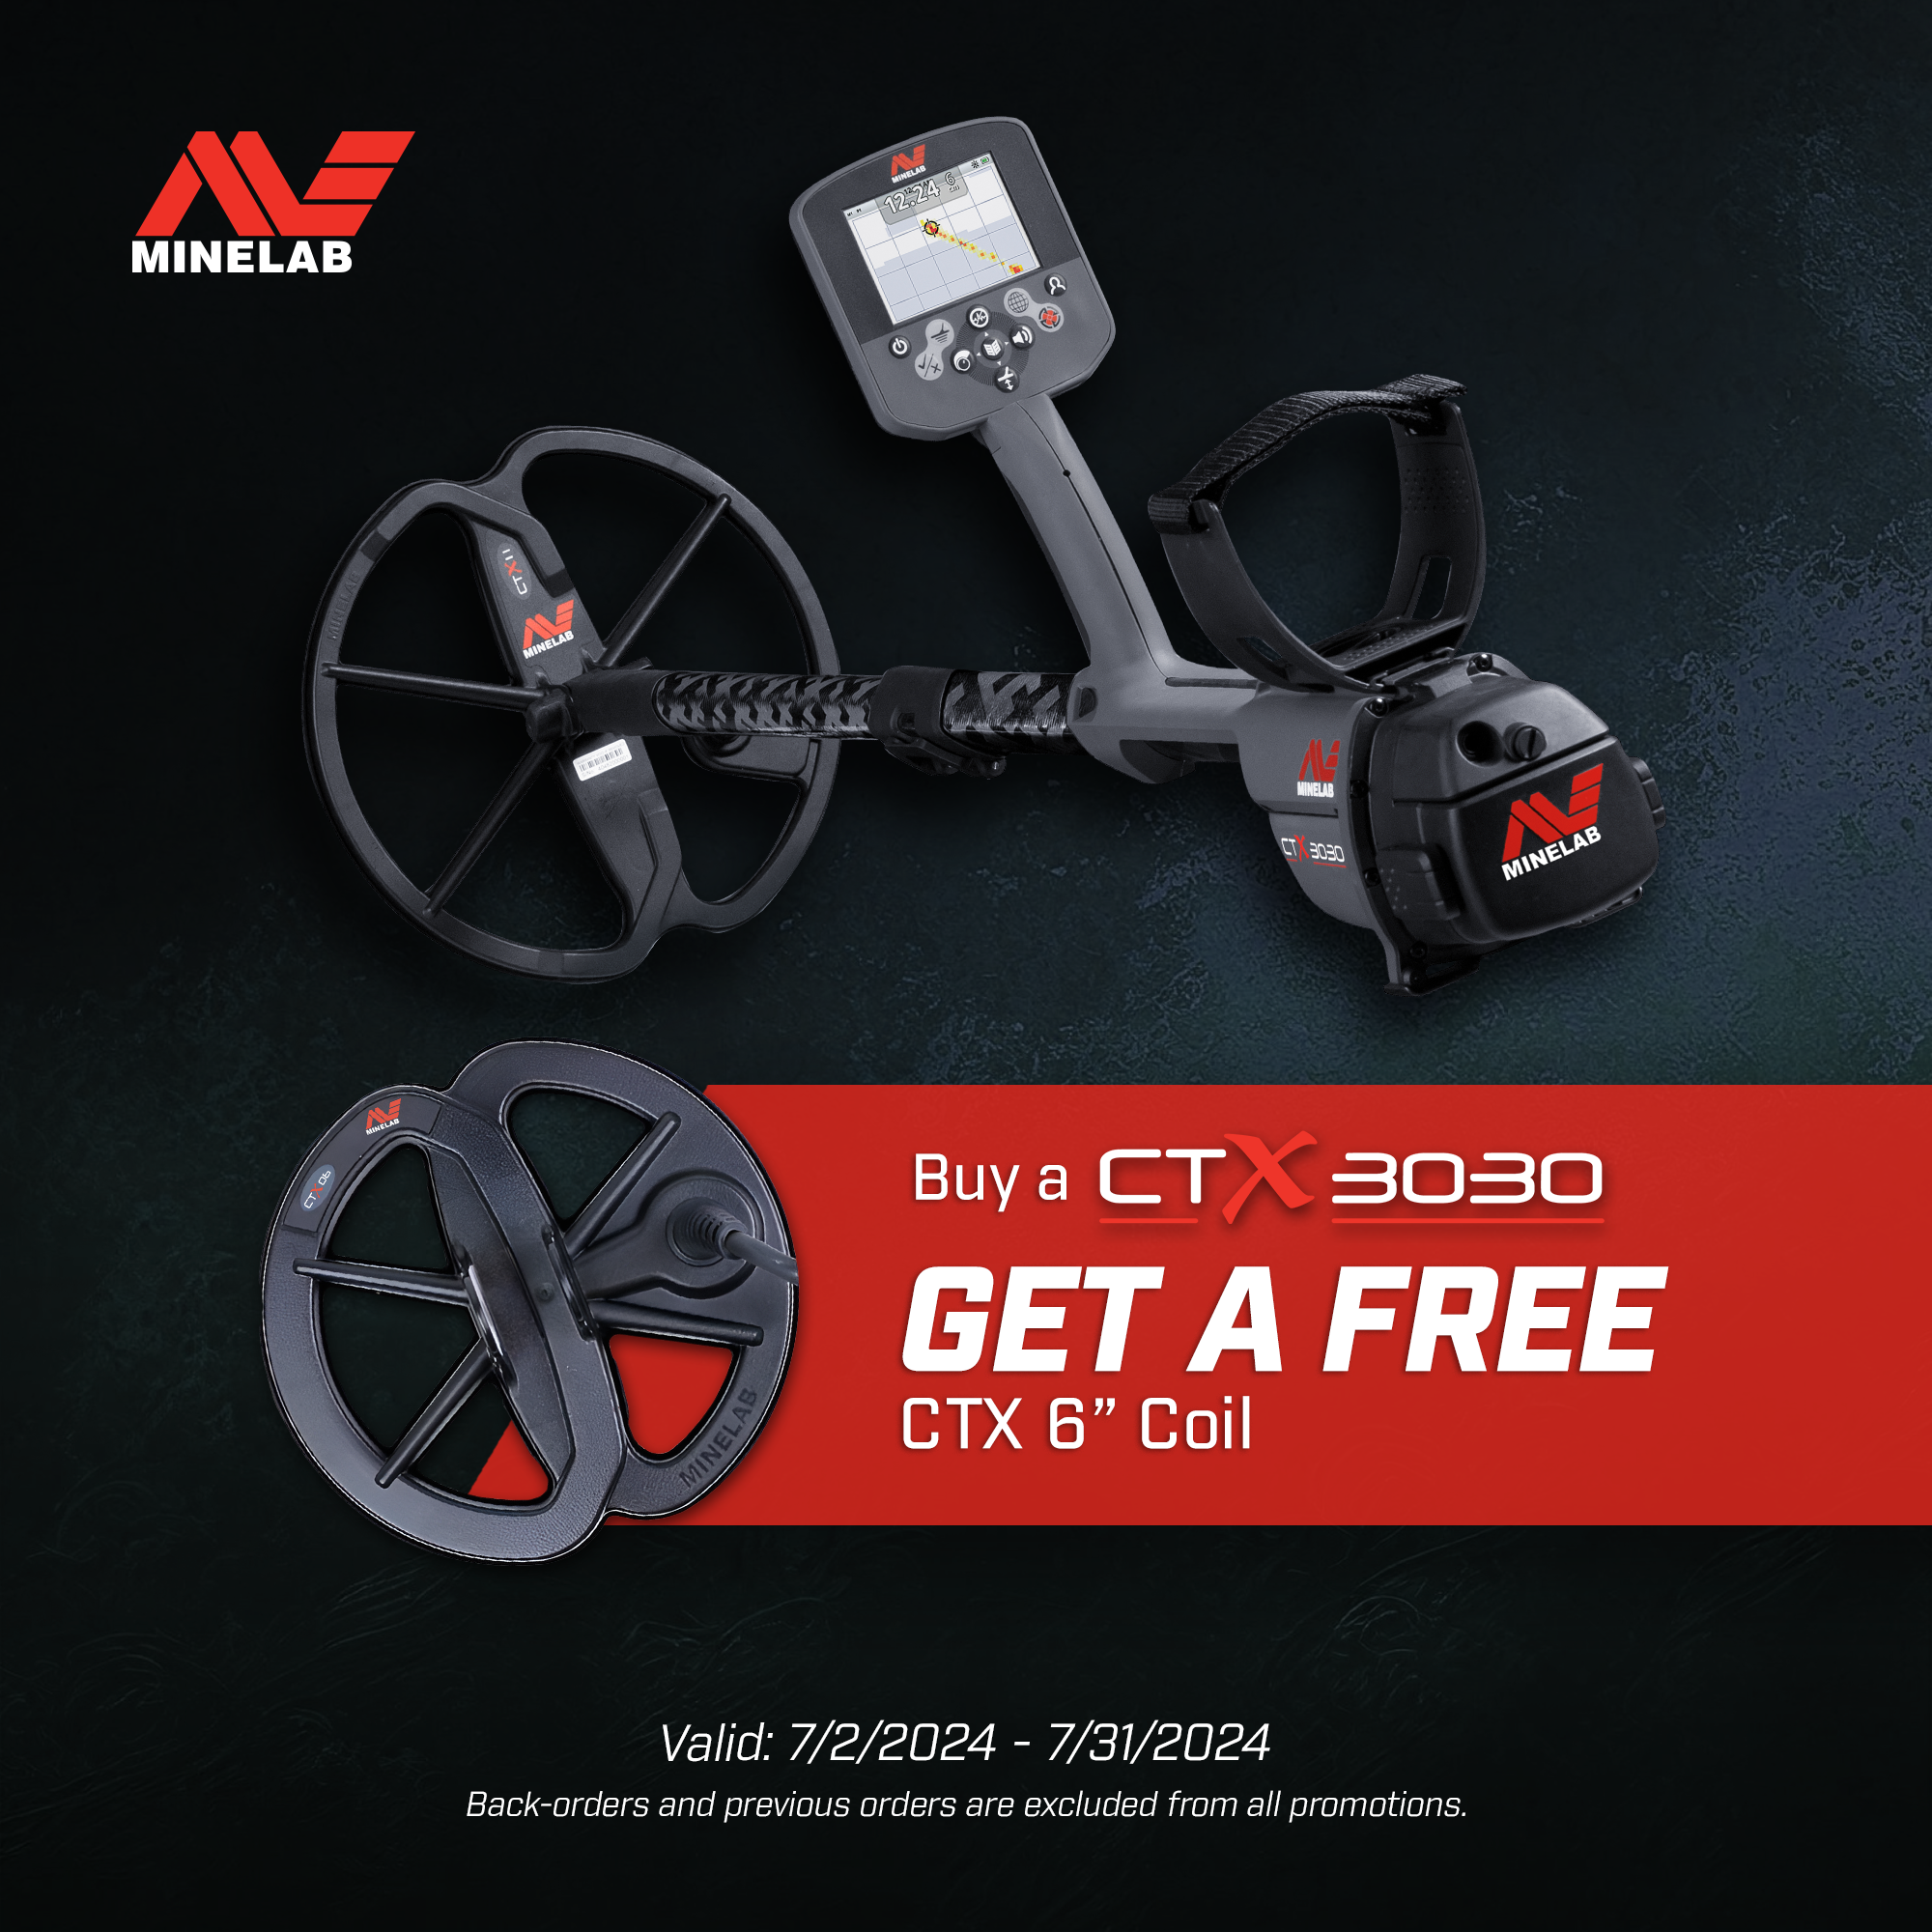 CTX 3030 with Free 6" Coil